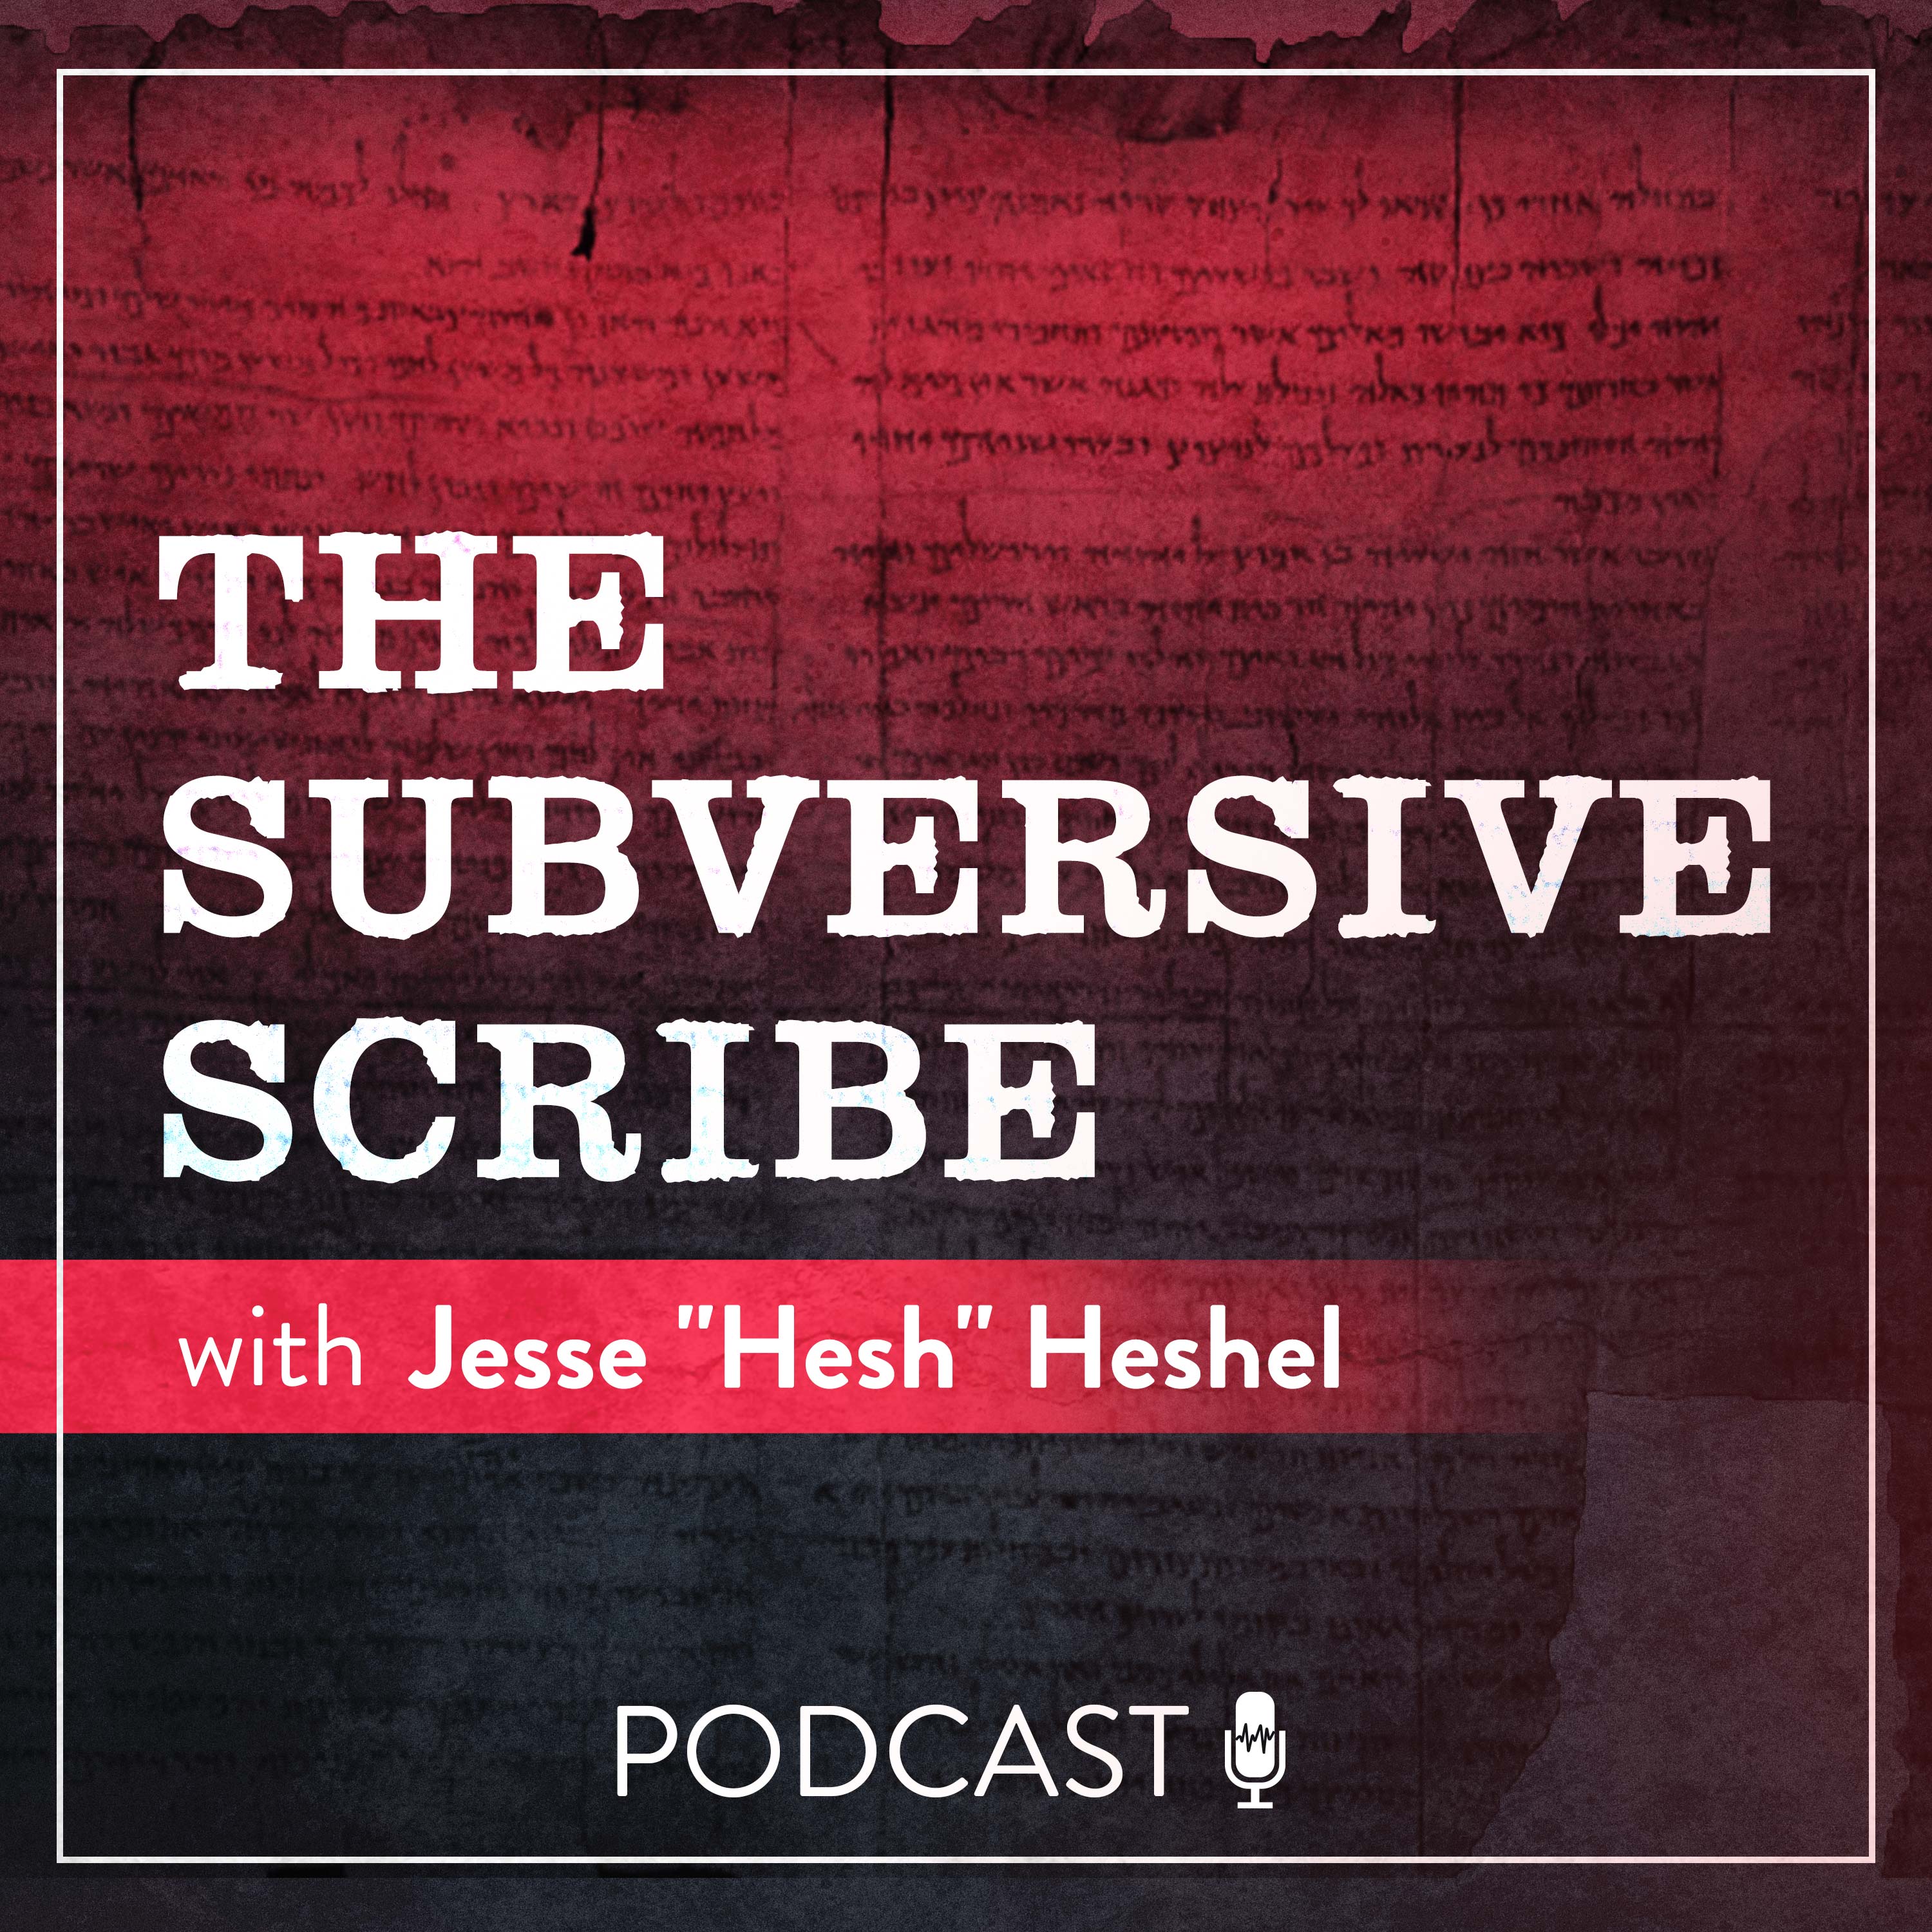 Episode 1 - What's So Subversive About The Hebrew Bible?